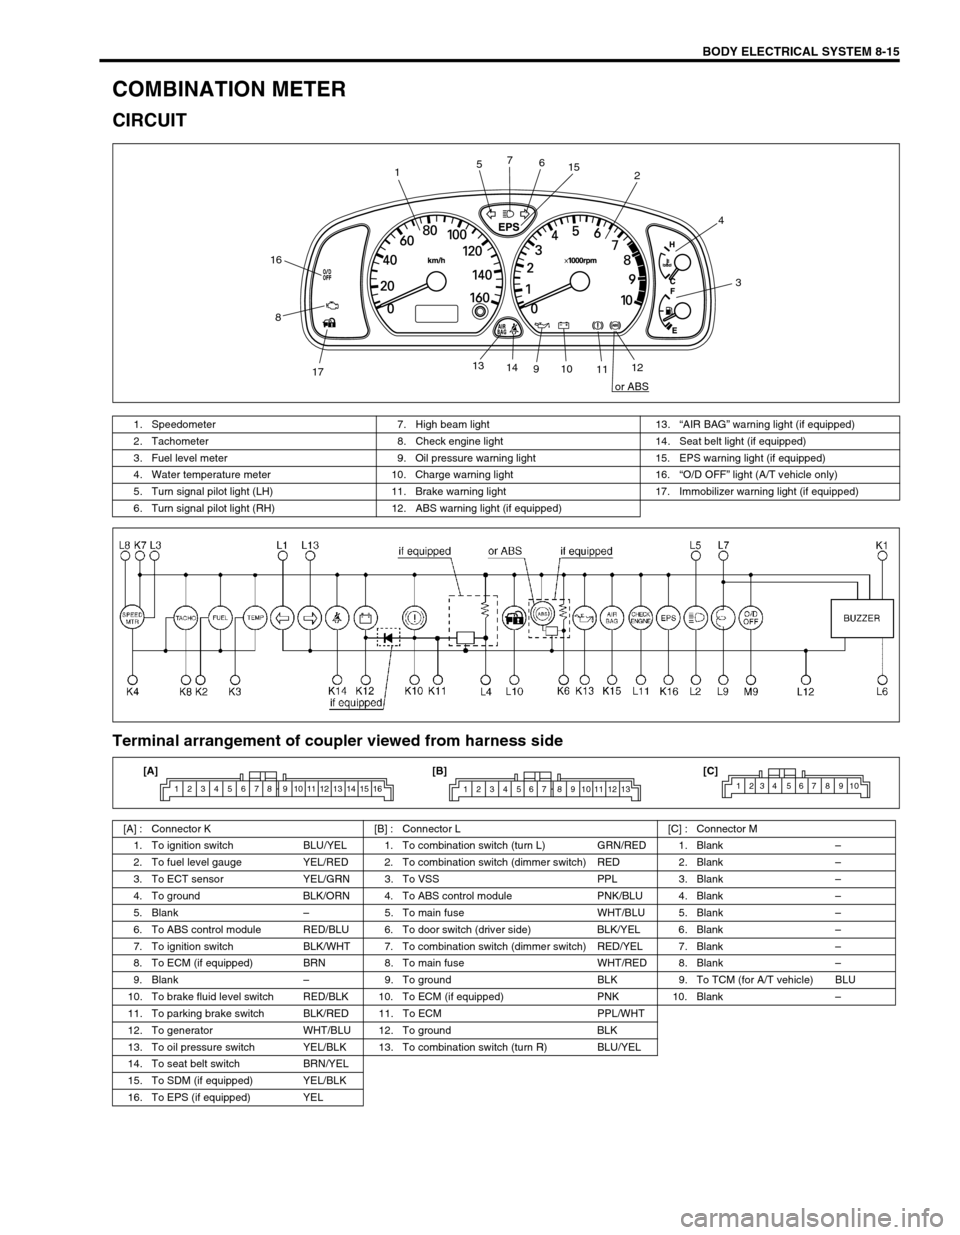 SUZUKI SWIFT 2000 1.G Transmission Service Workshop Manual BODY ELECTRICAL SYSTEM 8-15
COMBINATION METER
CIRCUIT
Terminal arrangement of coupler viewed from harness side
12
3 4
56 7
8
910
1112 13
14
1715
16
or ABS
1. Speedometer 7. High beam light 13.“AIR B